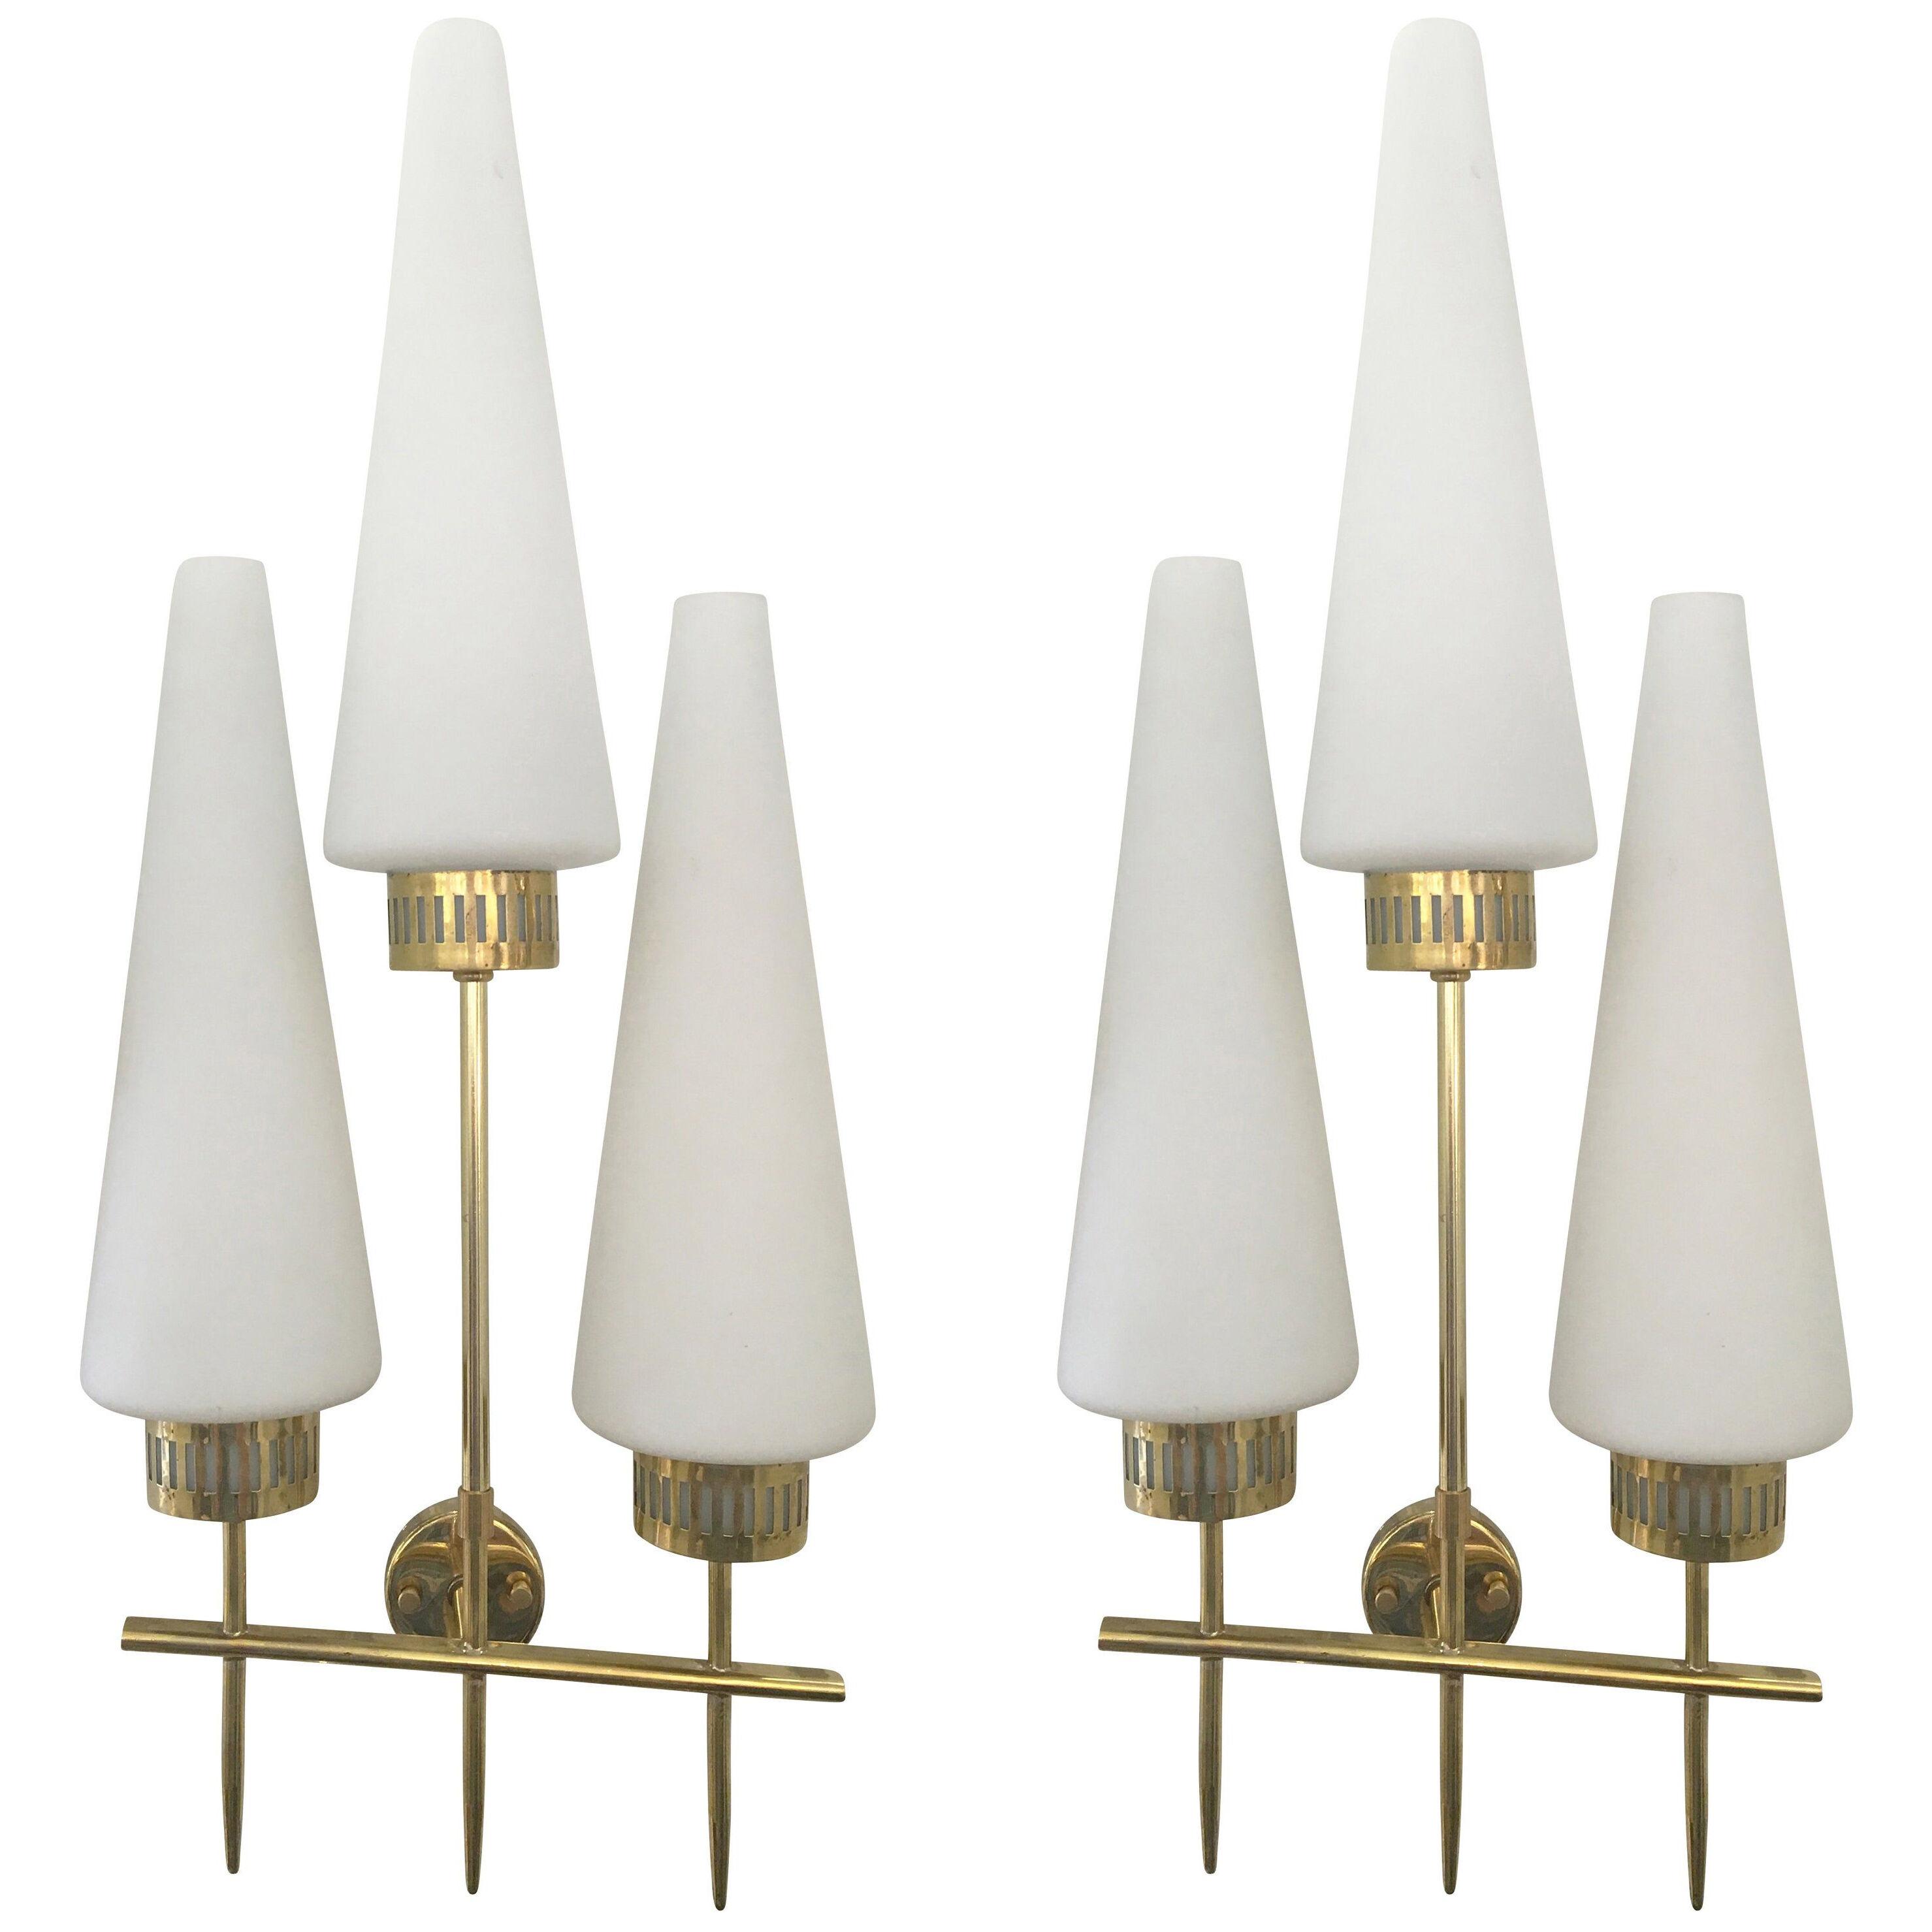 Italian Mid-Century Sconces with Three Conical Glass Shades